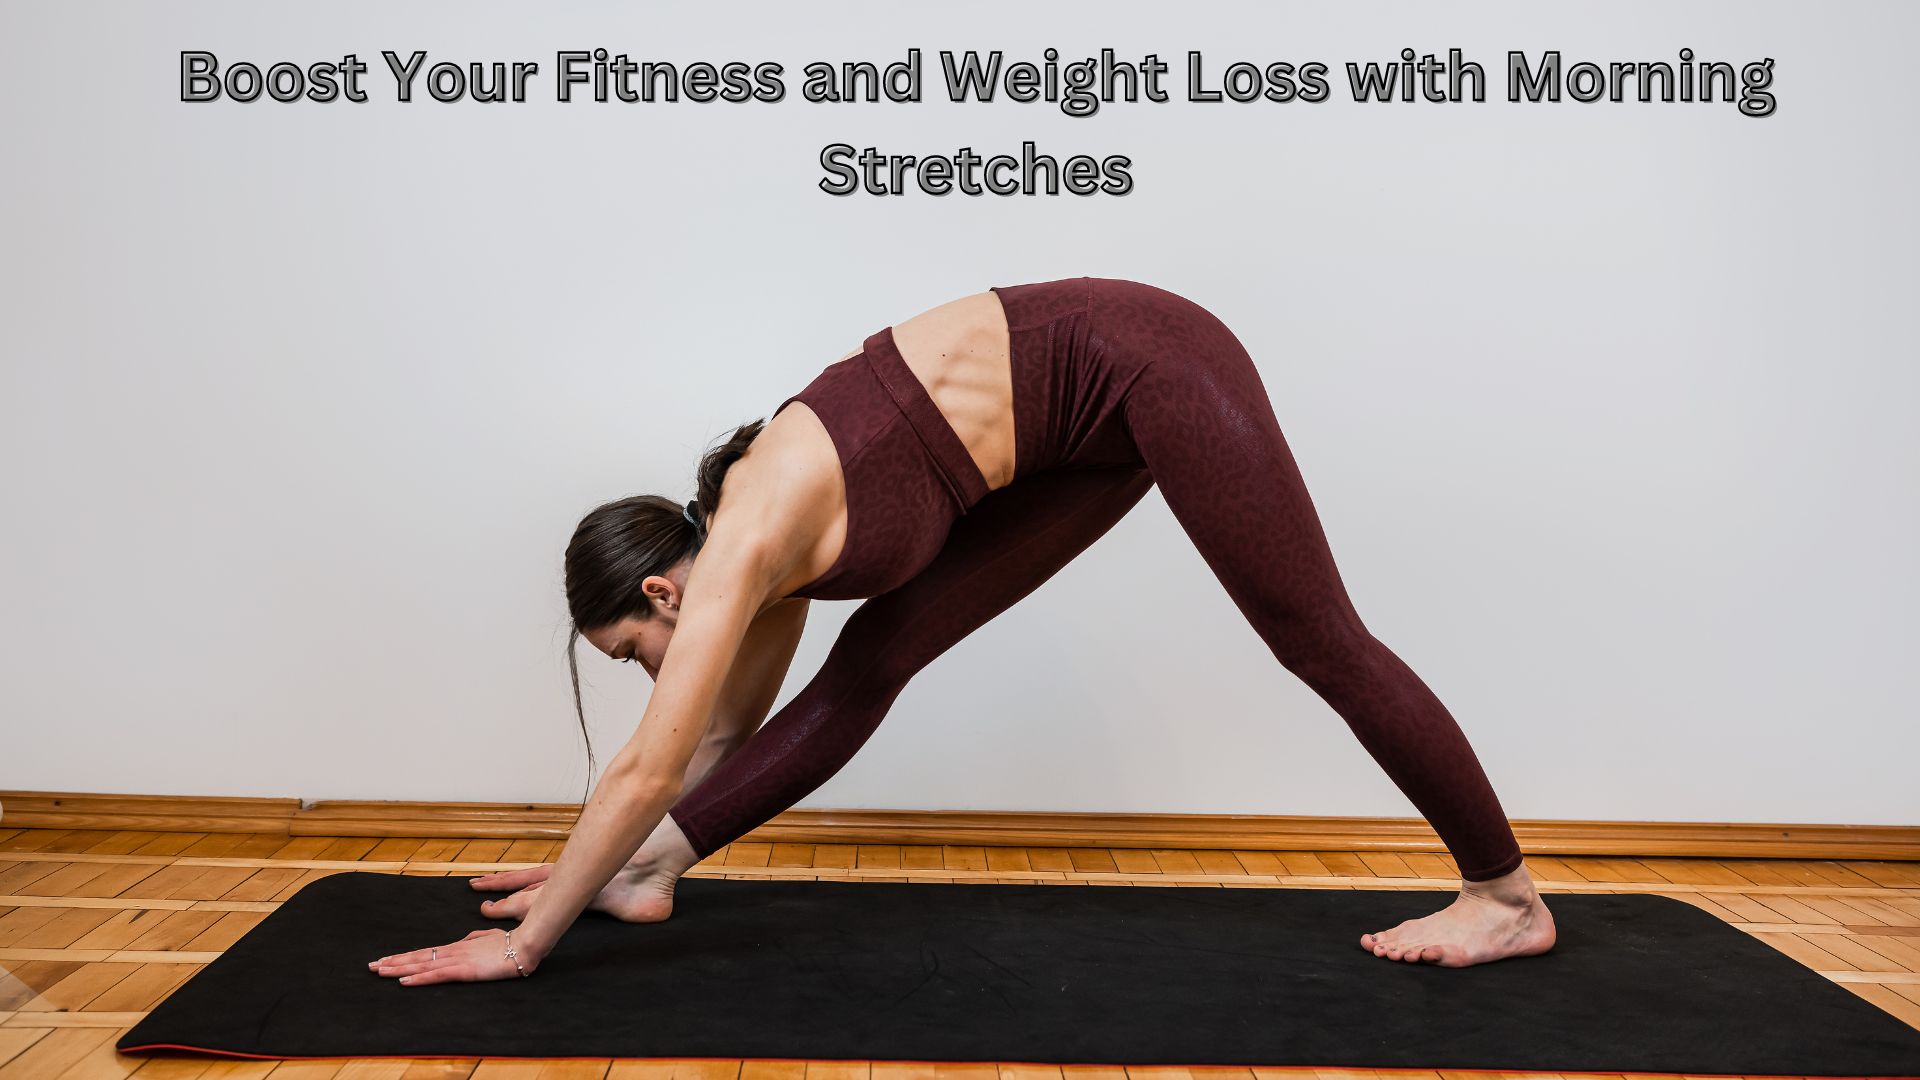 Boost Your Fitness and Weight Loss with Morning Stretches